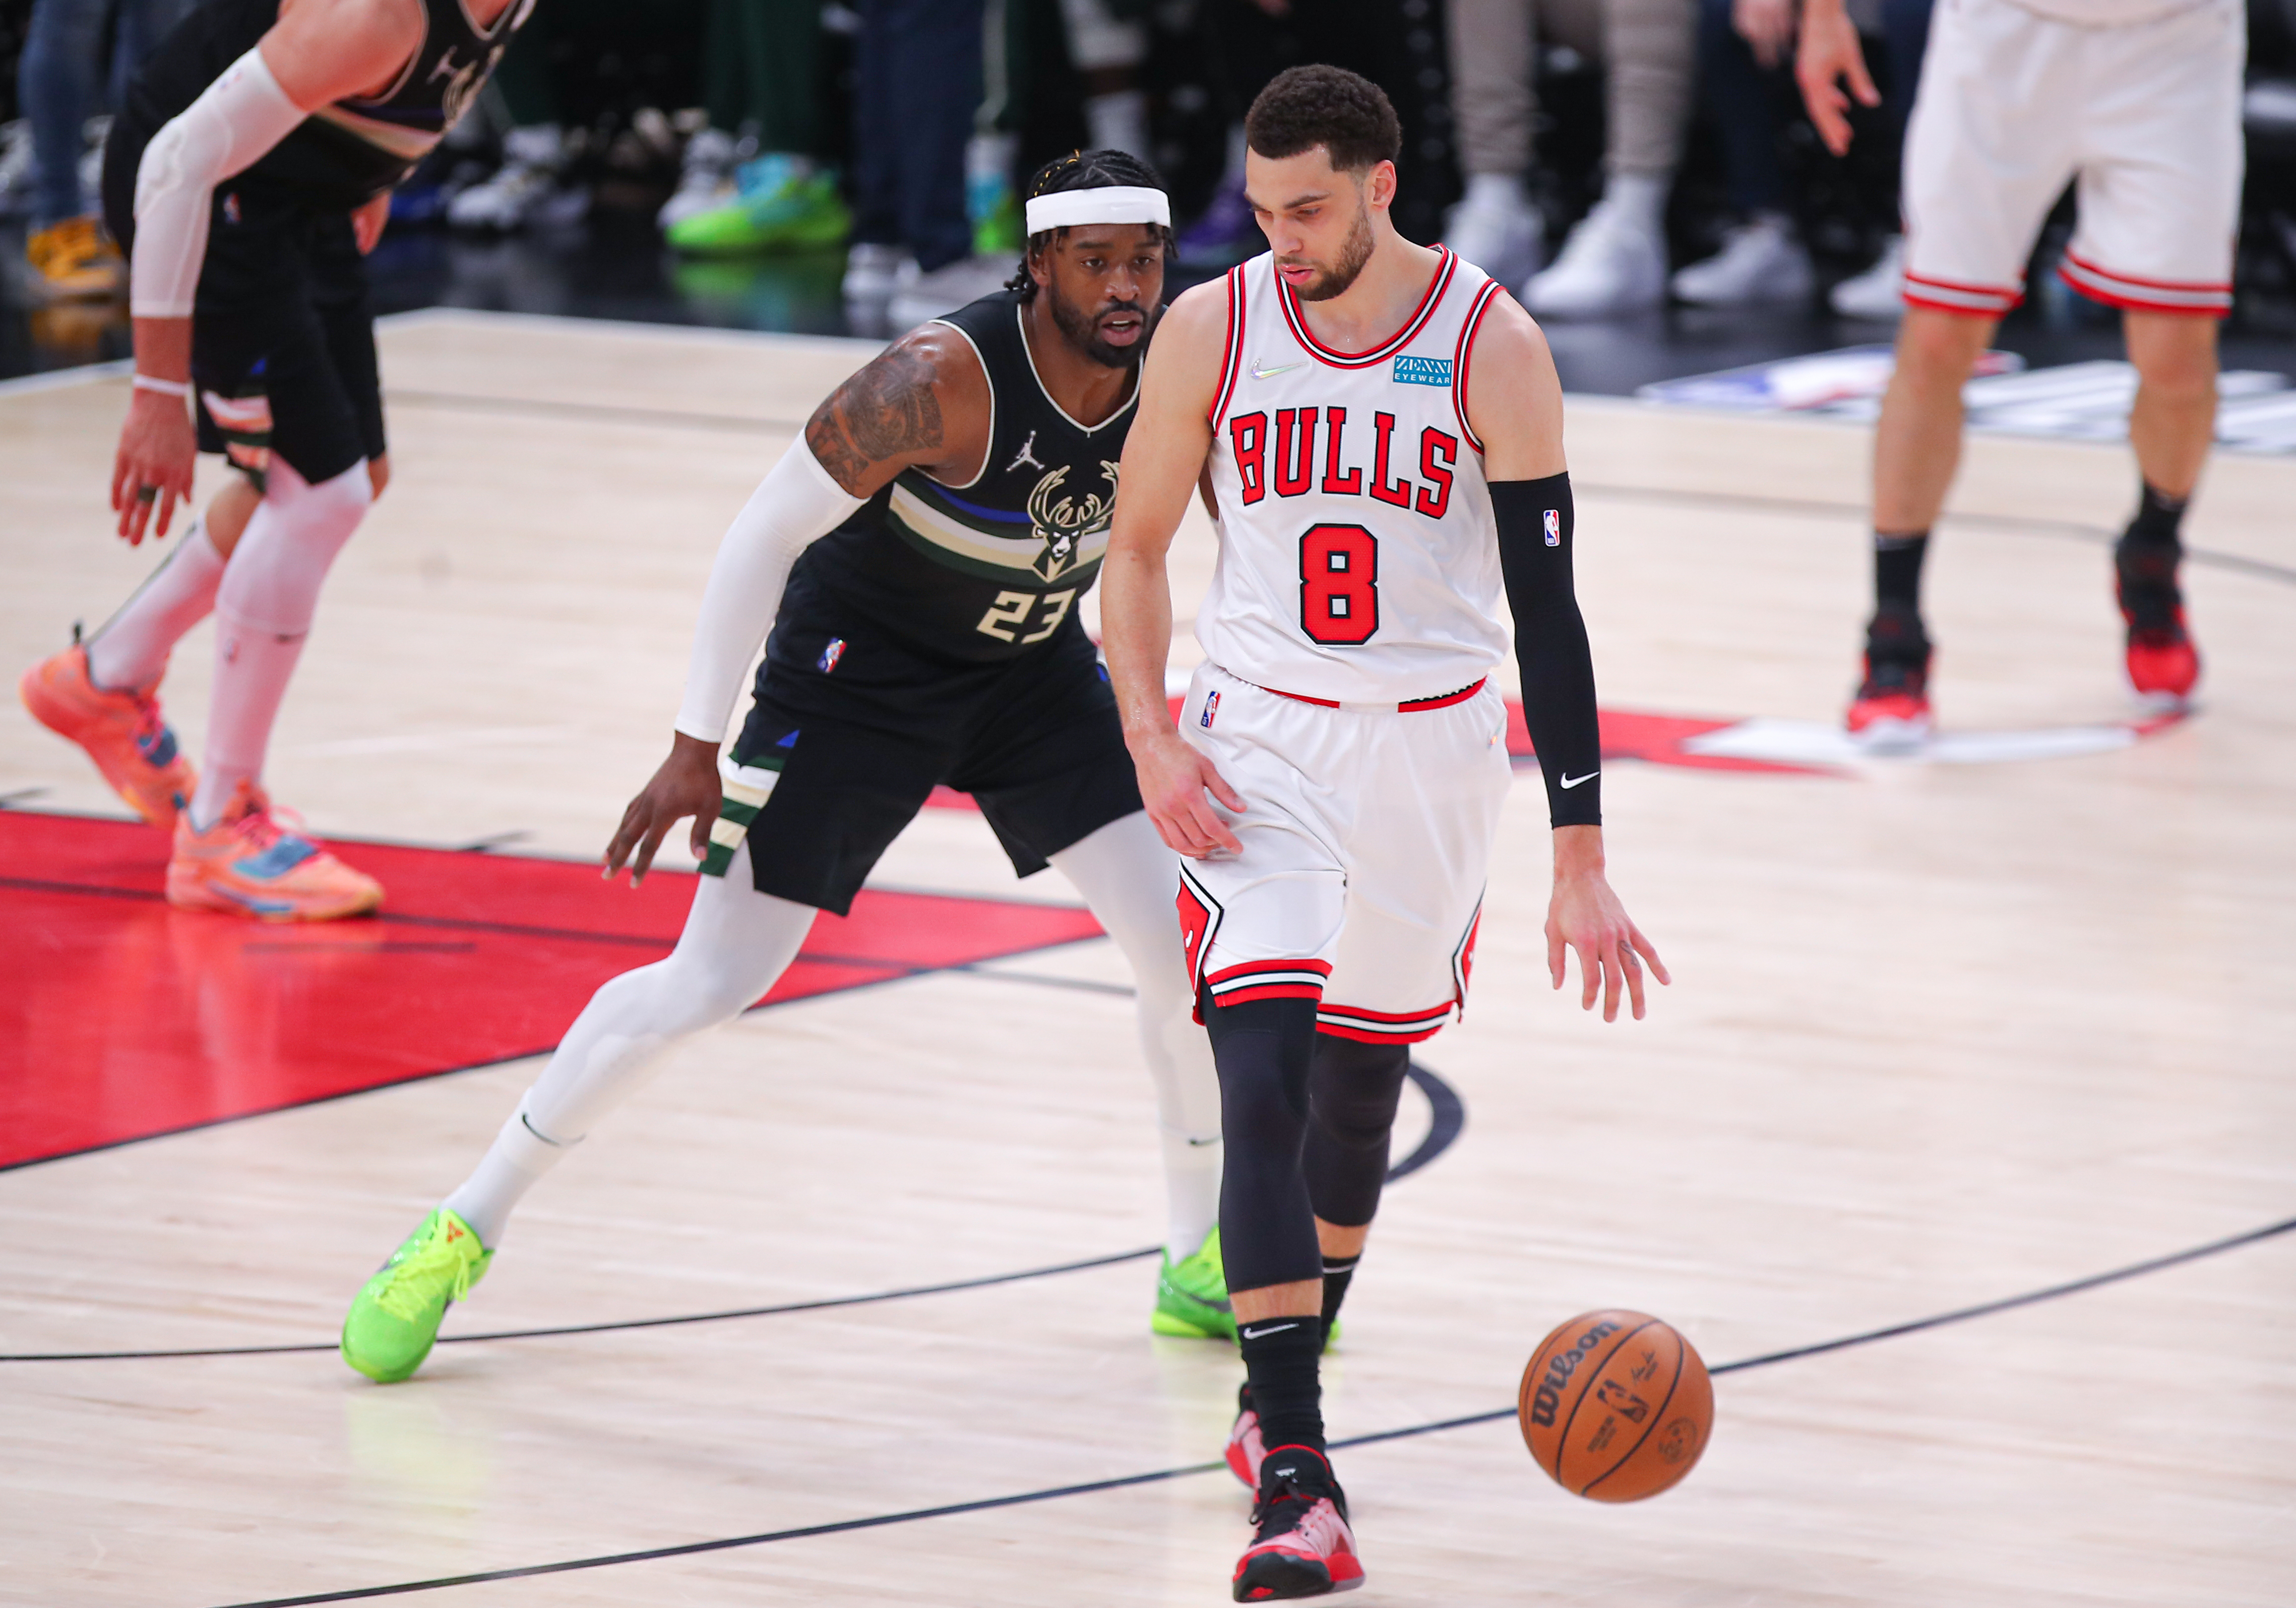 NBA: APR 24 Eastern Conference First Round Playoffs - Bucks at Bulls